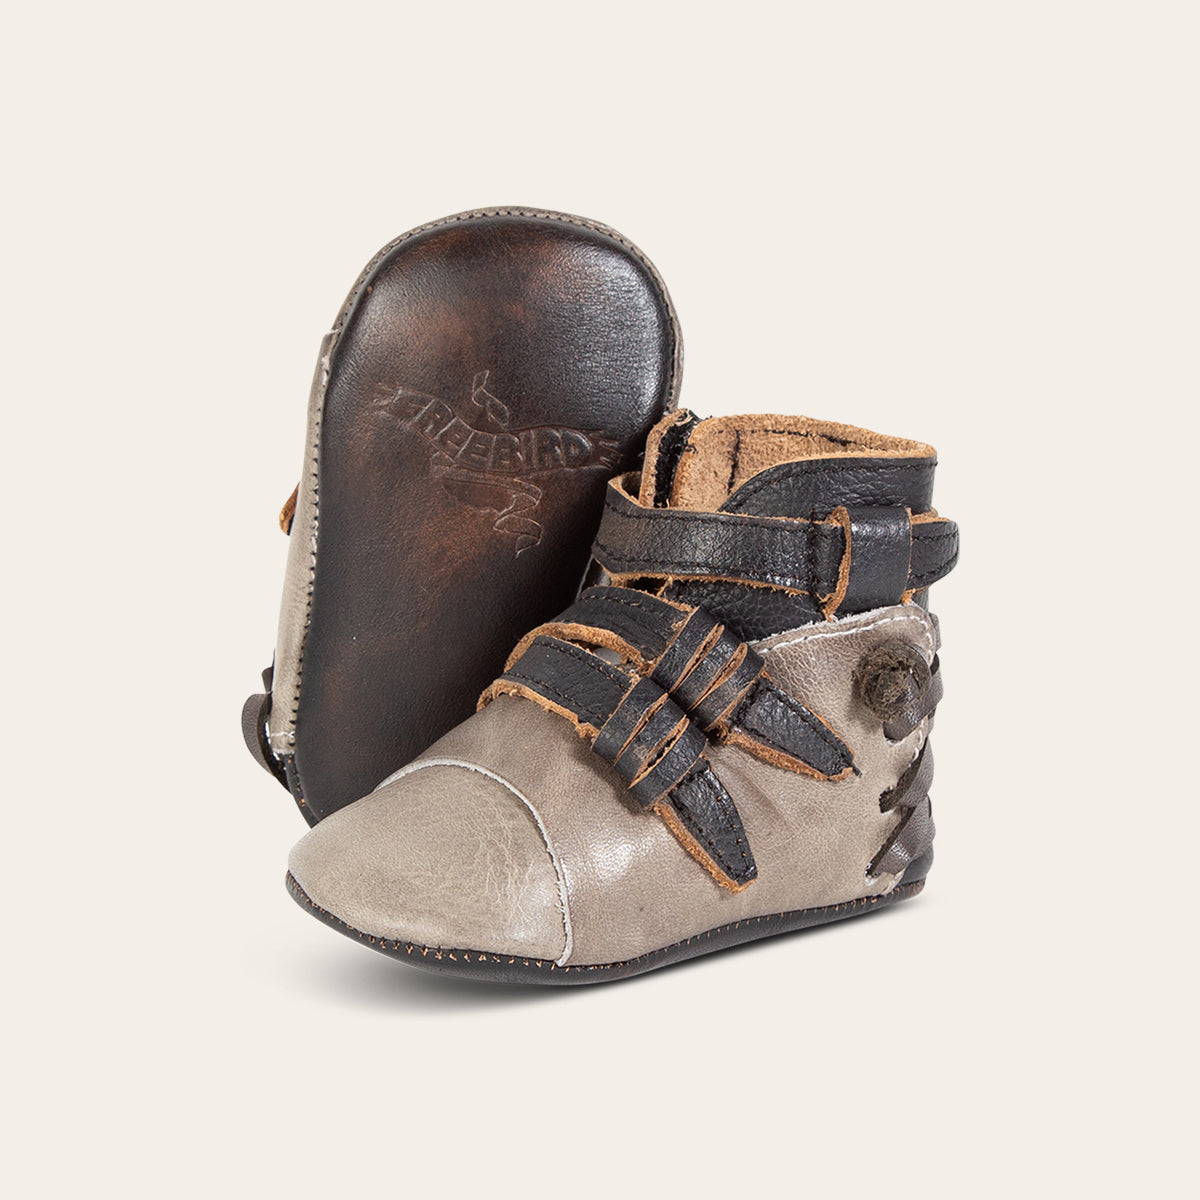 front view showing contrasting leather side strap detailing and soft leather imprinted sole on FREEBIRD infant baby crue grey multi leather bootie